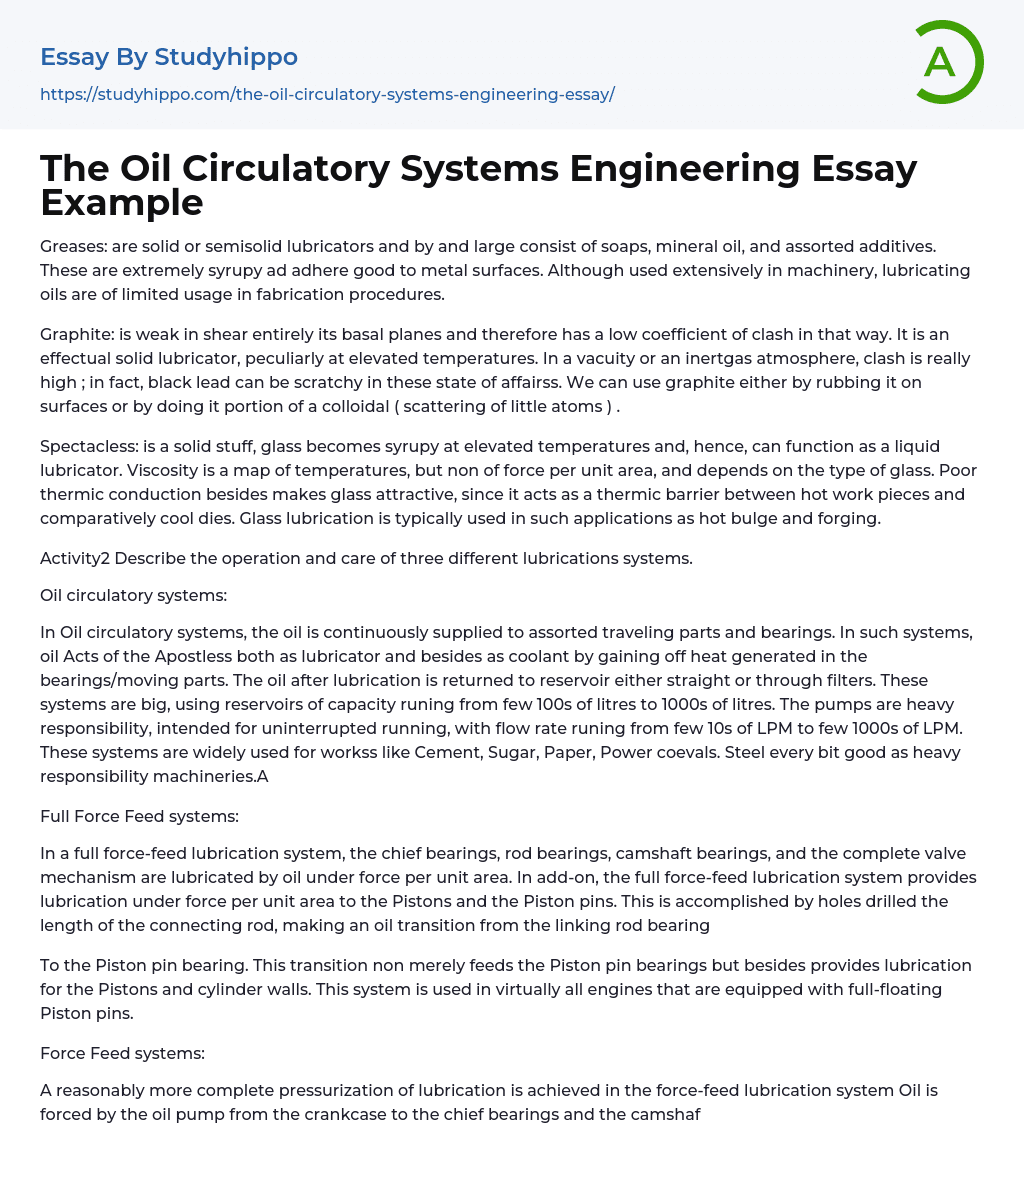 The Oil Circulatory Systems Engineering Essay Example